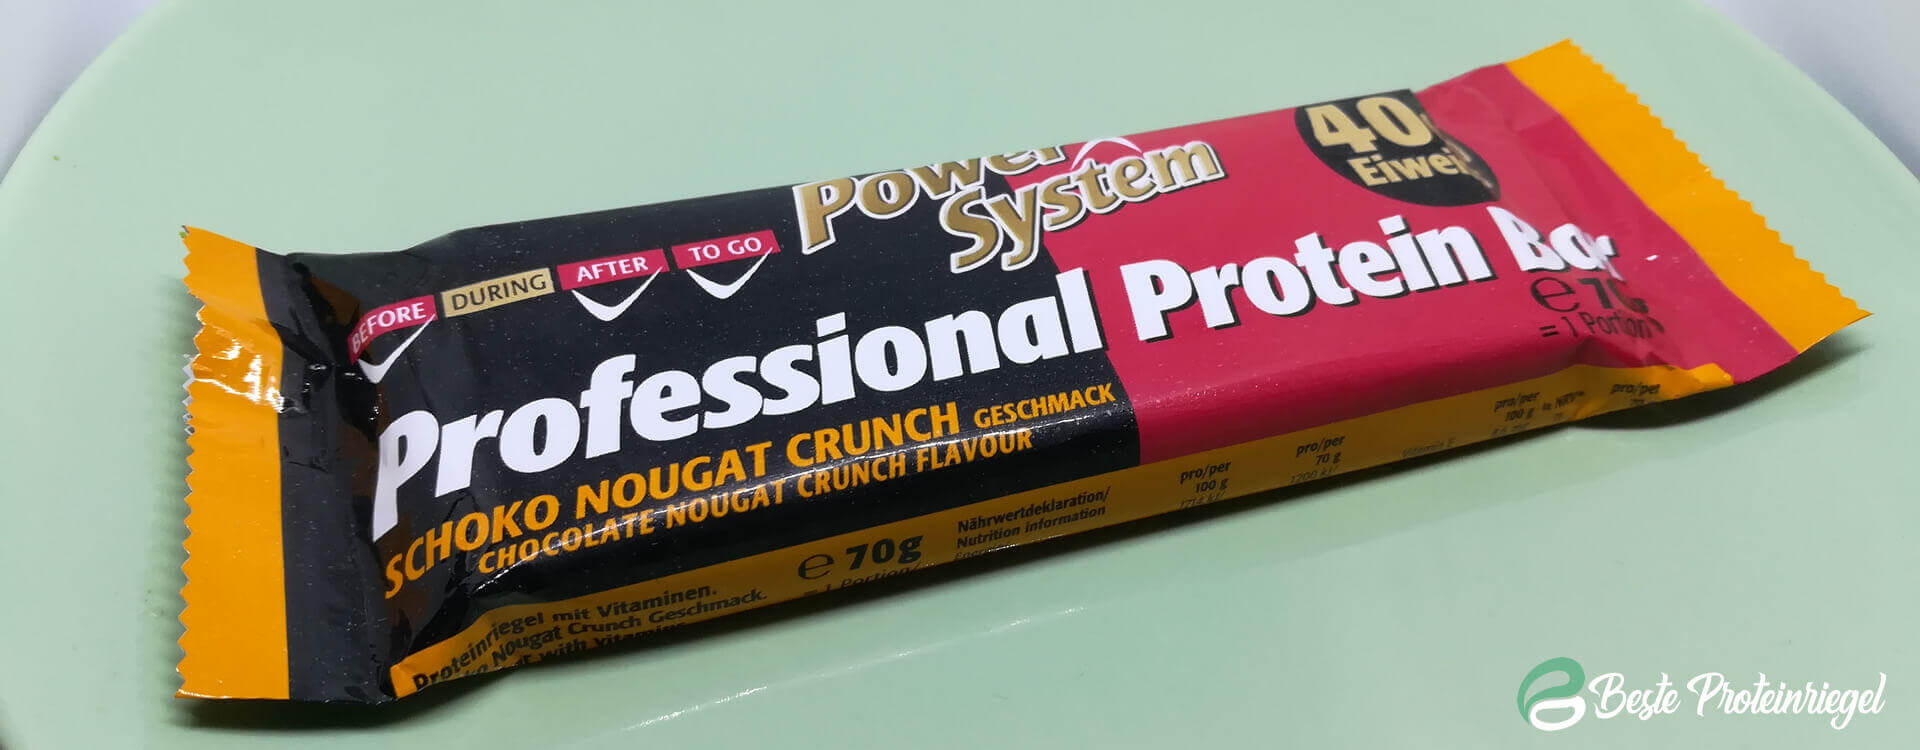 Power System Professional Protein Bar 40% Eiweiß Verpackung